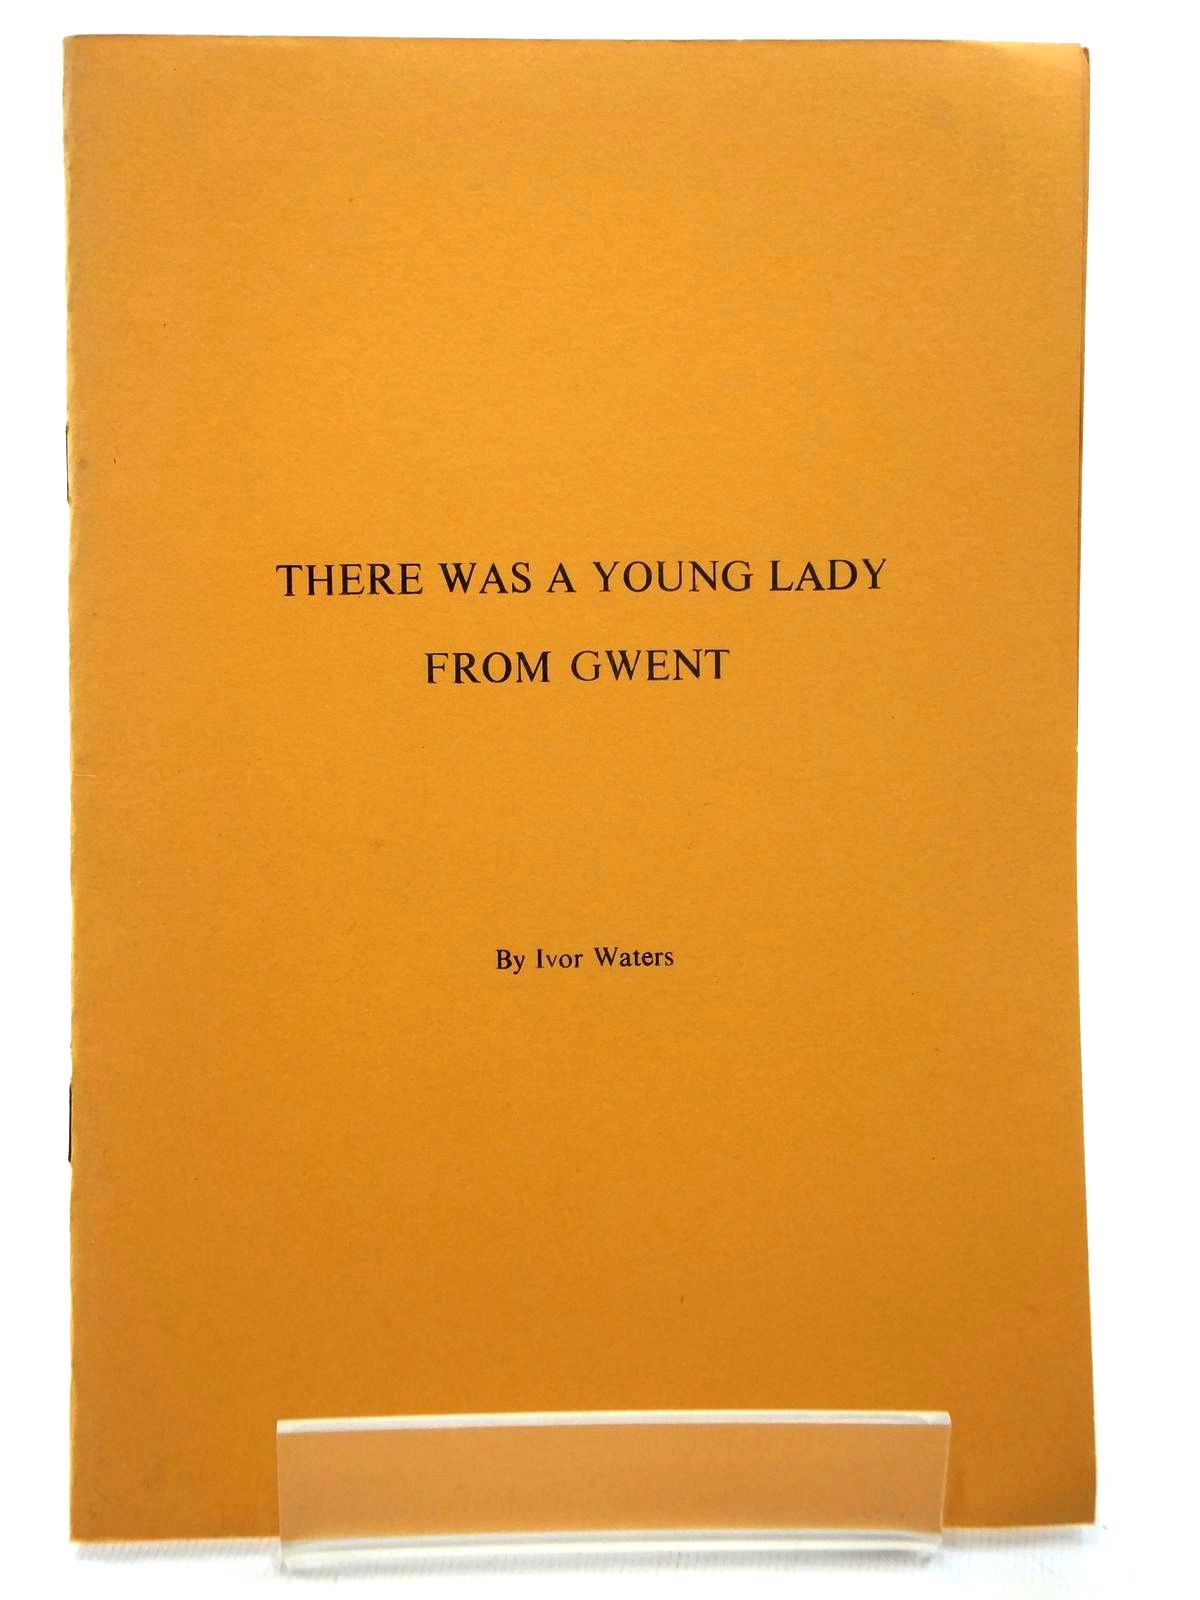 Photo of THERE WAS A YOUNG LADY FROM GWENT written by Waters, Ivor published by Ivor Waters (STOCK CODE: 1609698)  for sale by Stella & Rose's Books